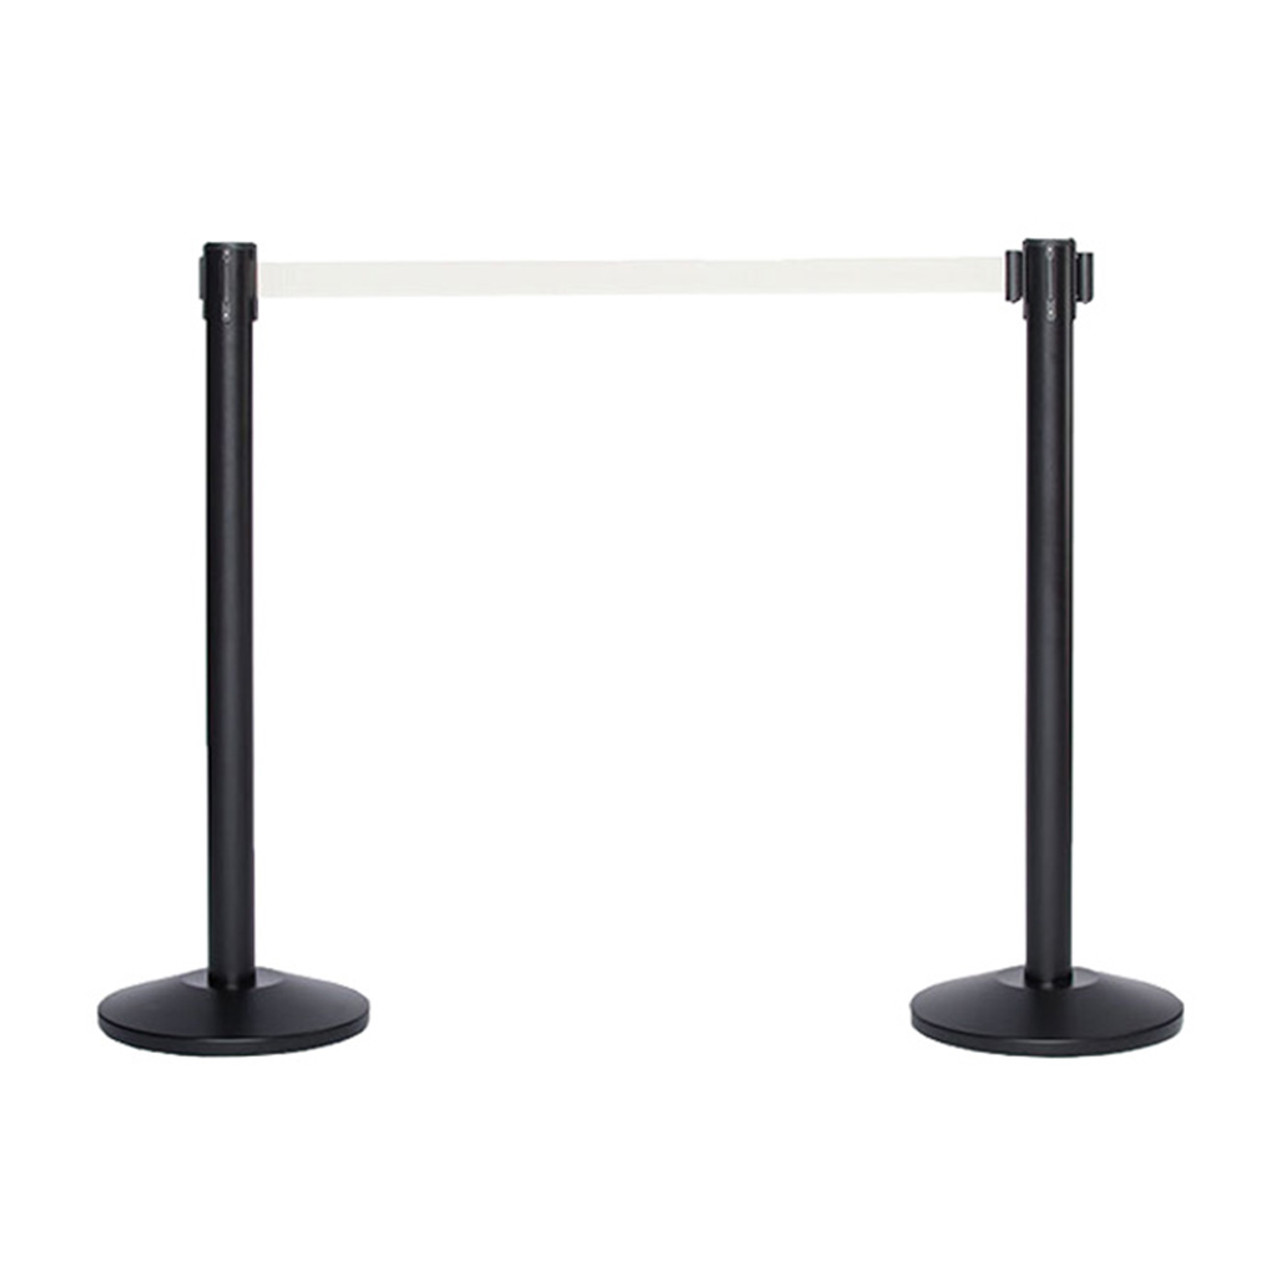 Best Value Pair of Black Retractable Belt Stanchions with a 10' Grey Belt